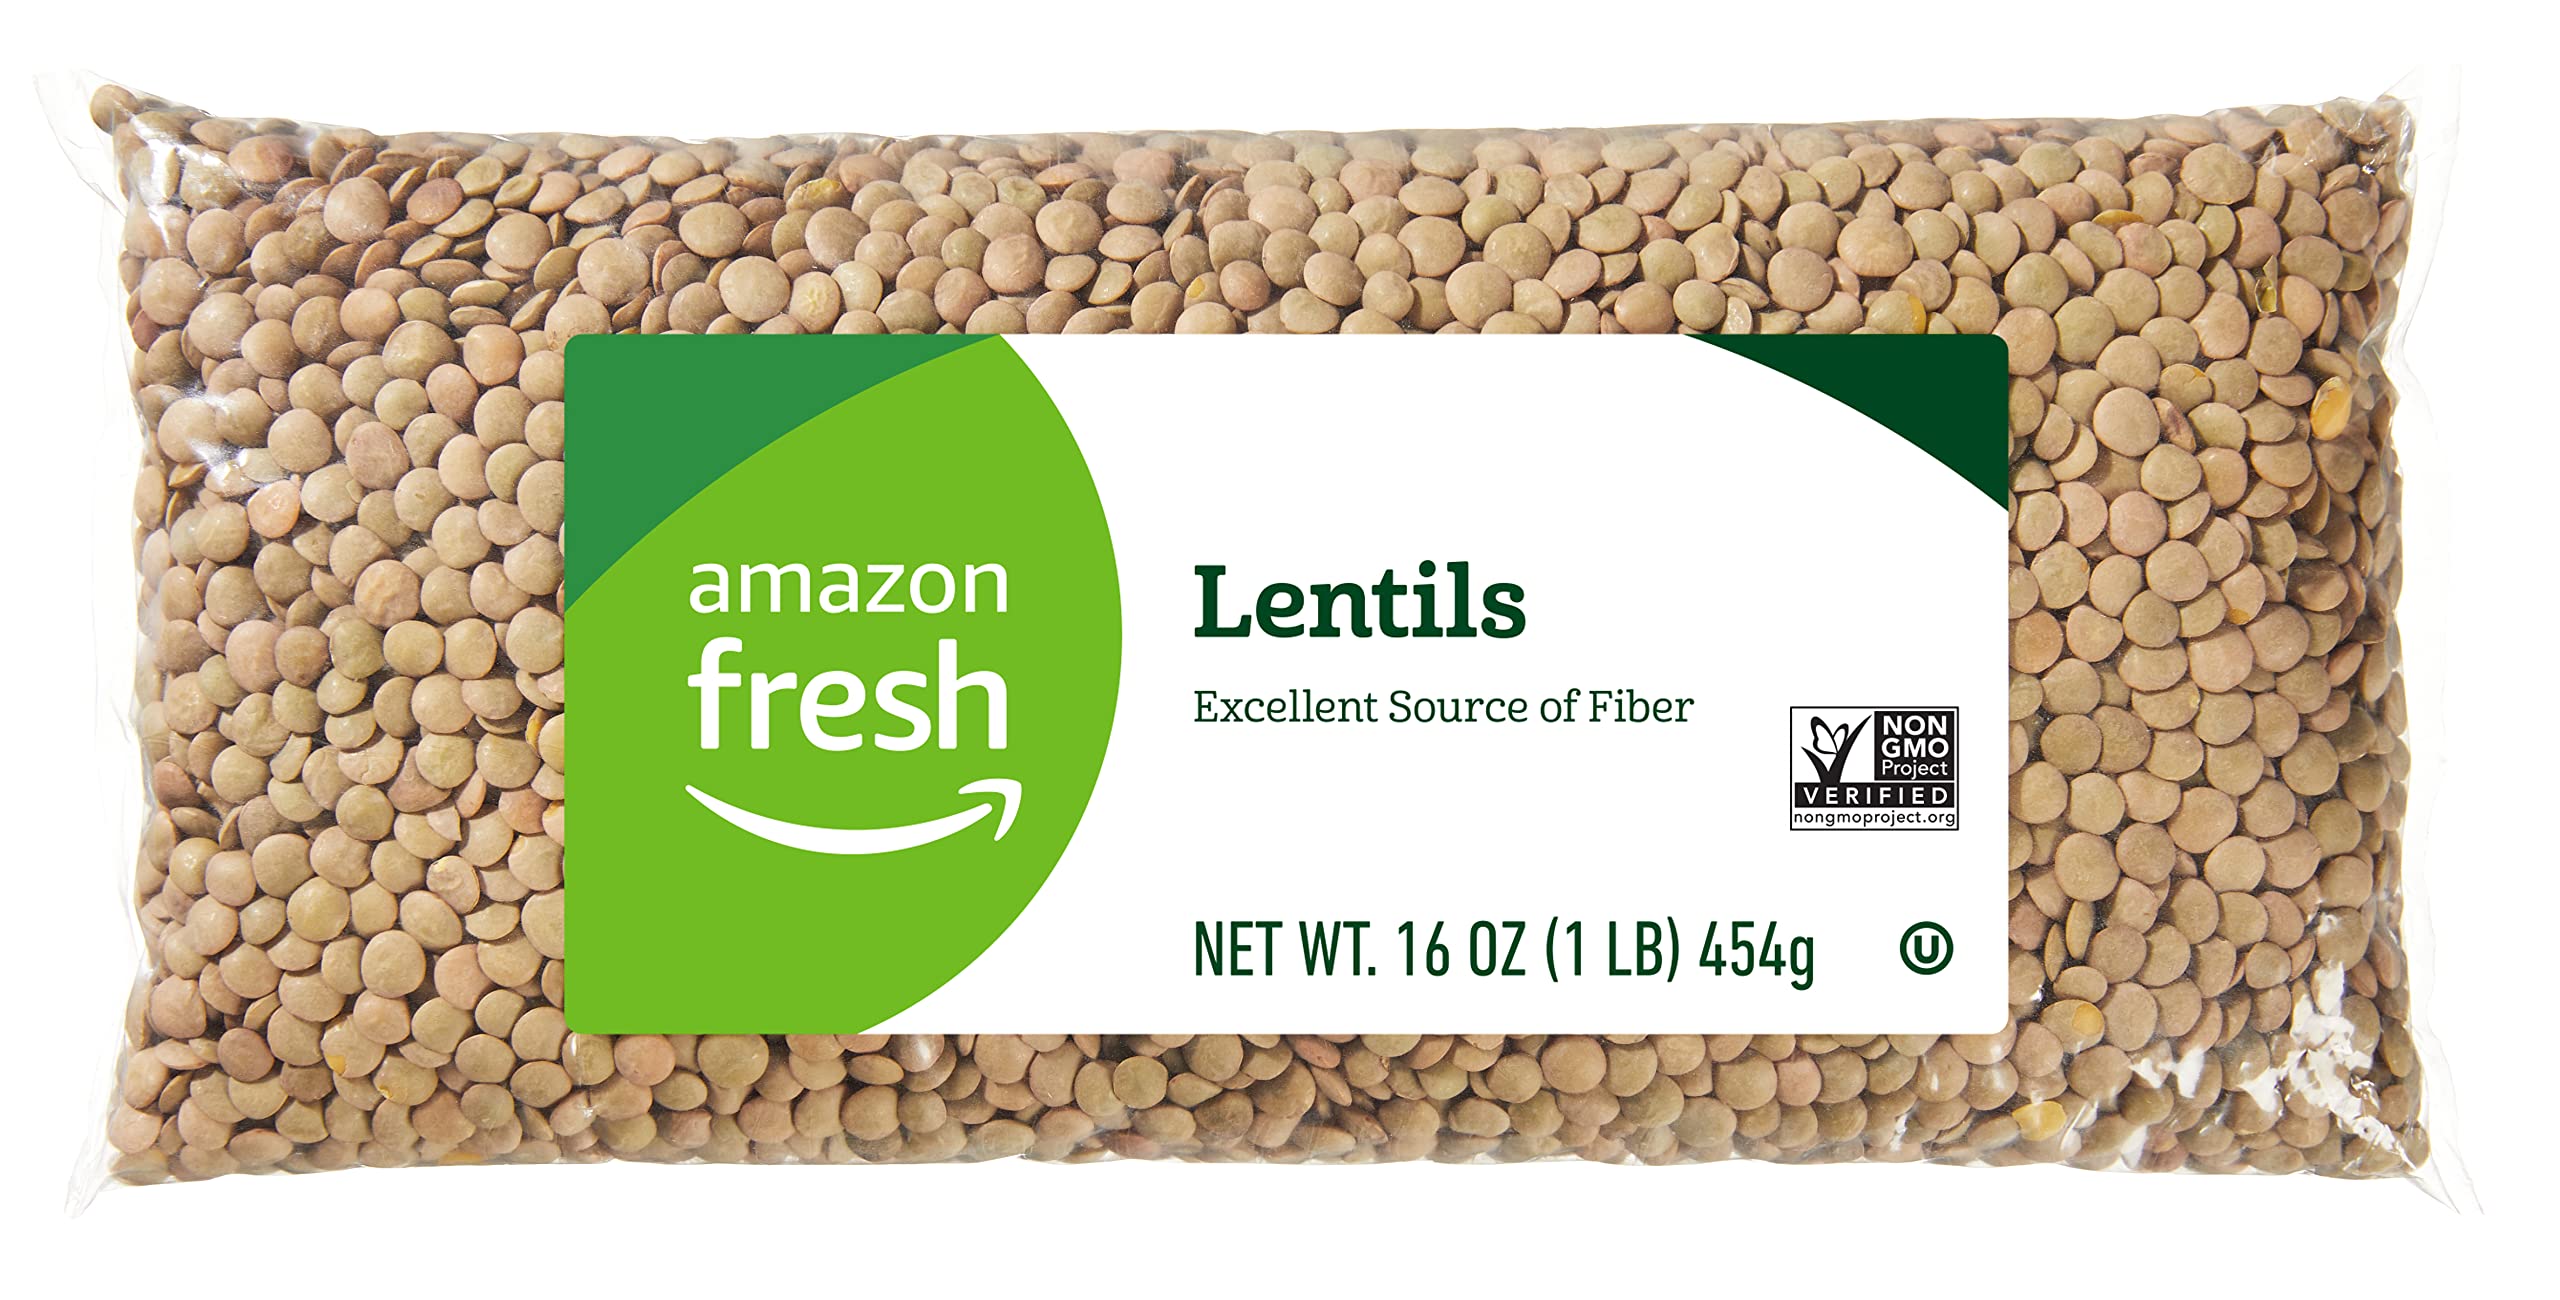 16-Oz Amazon Fresh Whole Lentils $1.59 + Free Shipping w/ Prime or on orders over $35